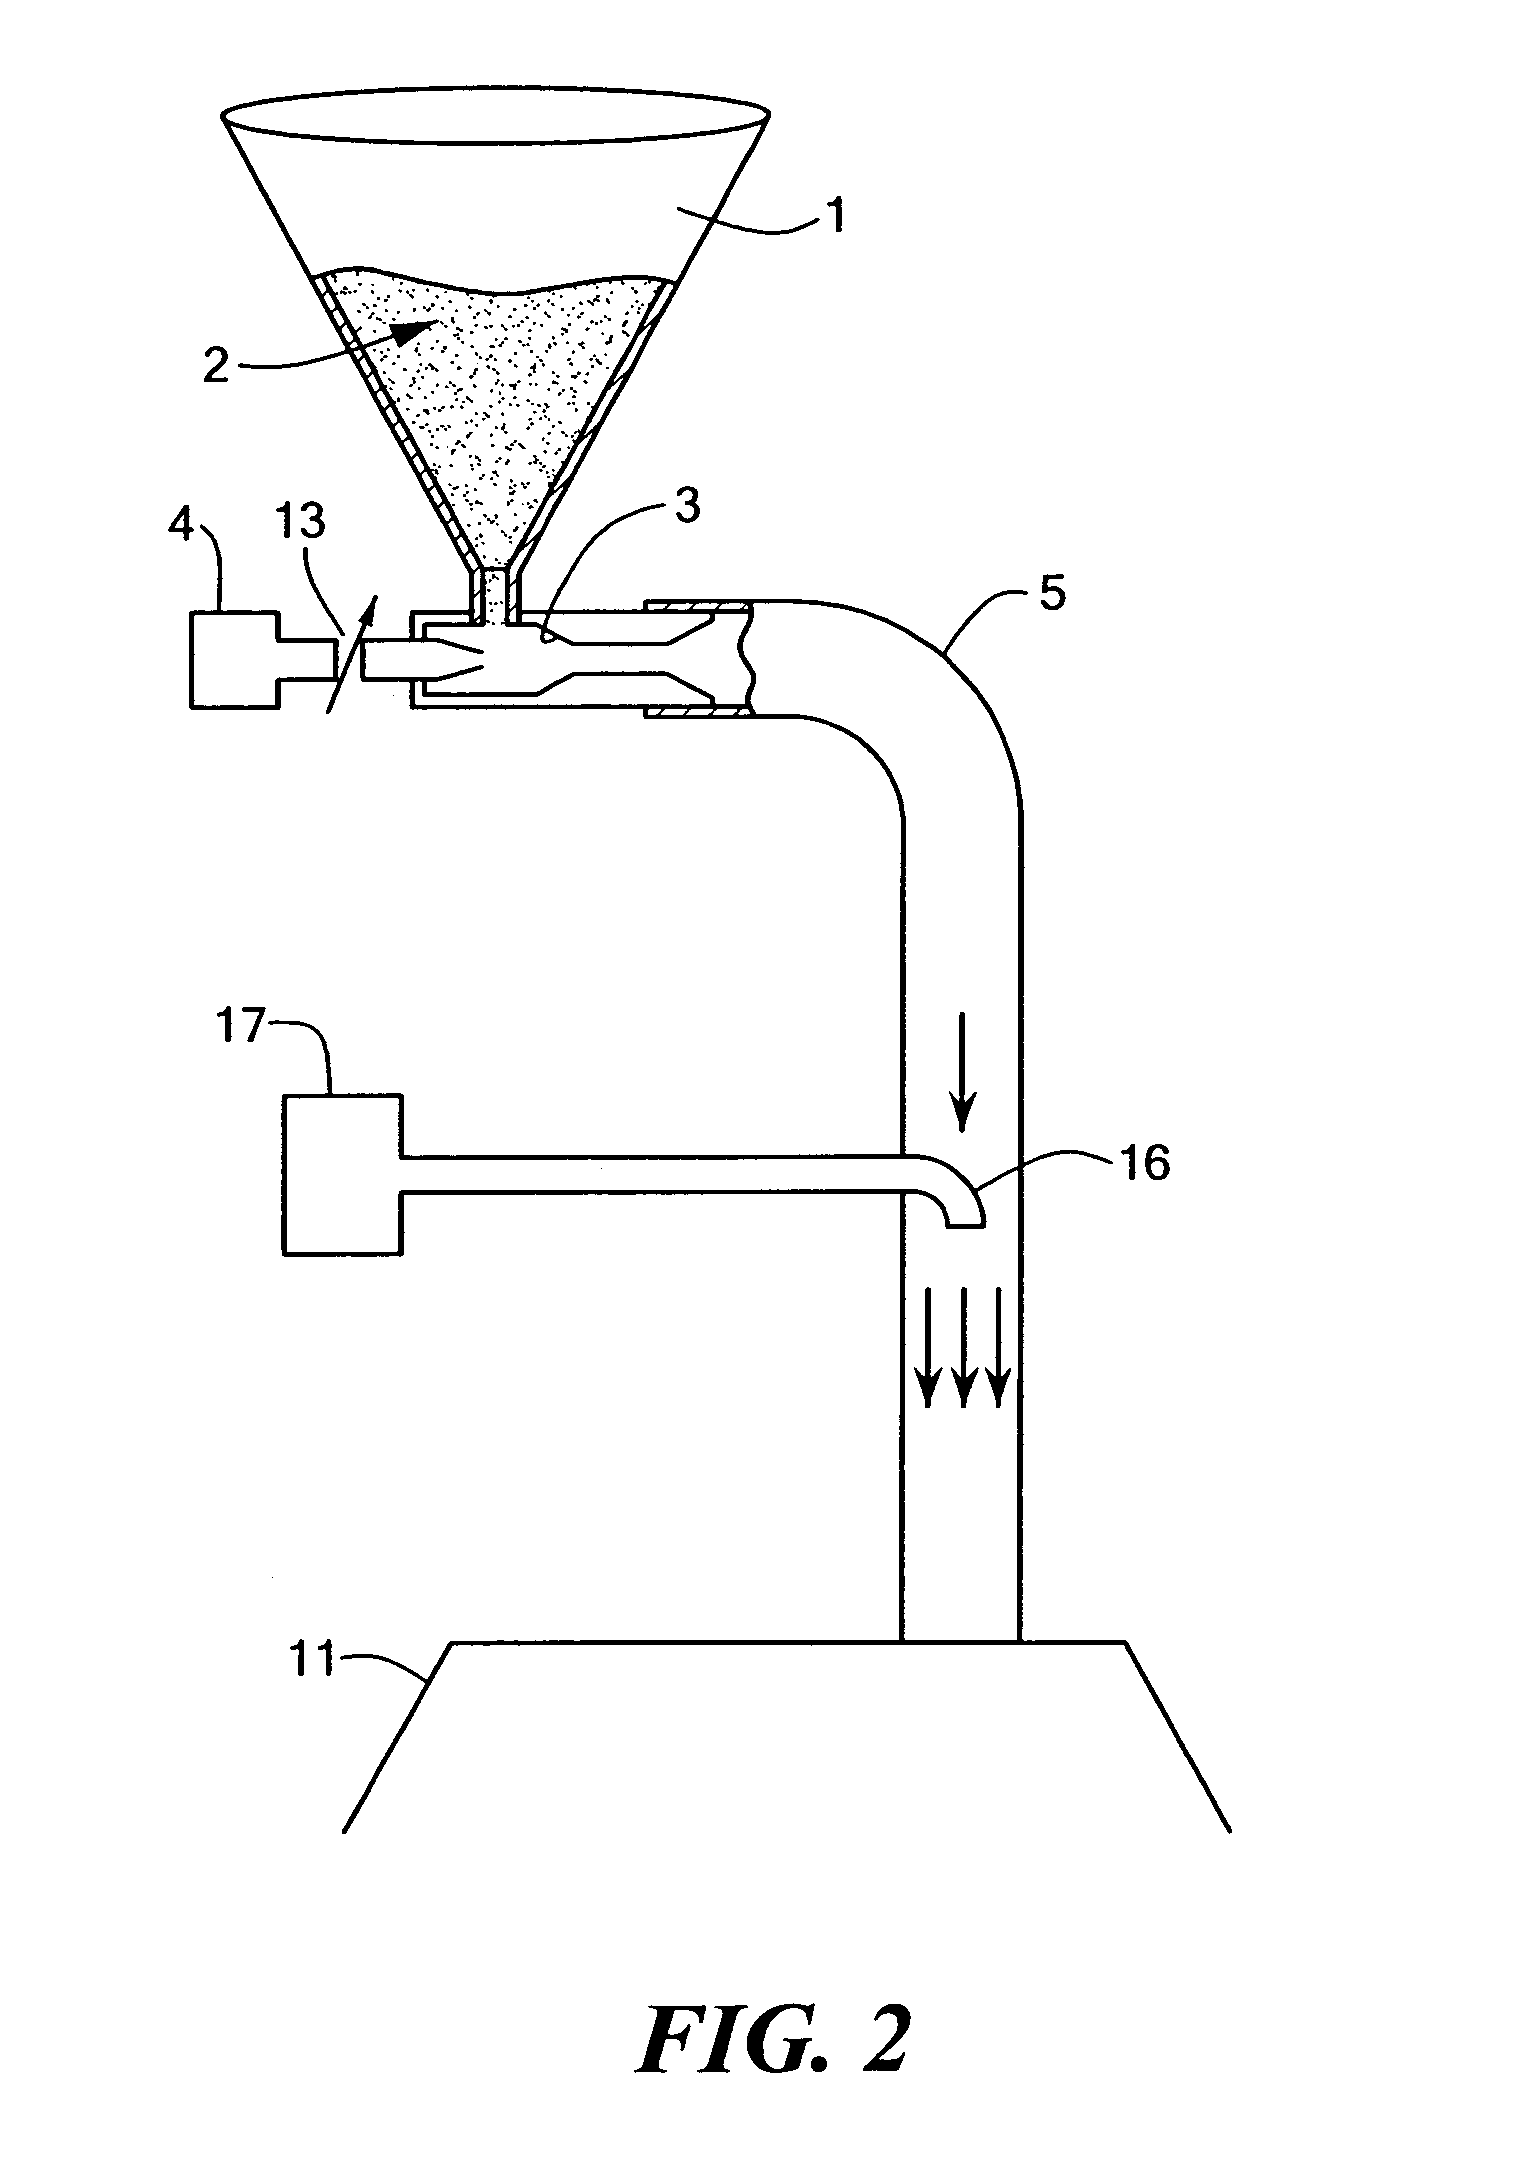 Process and apparatus for highway marking